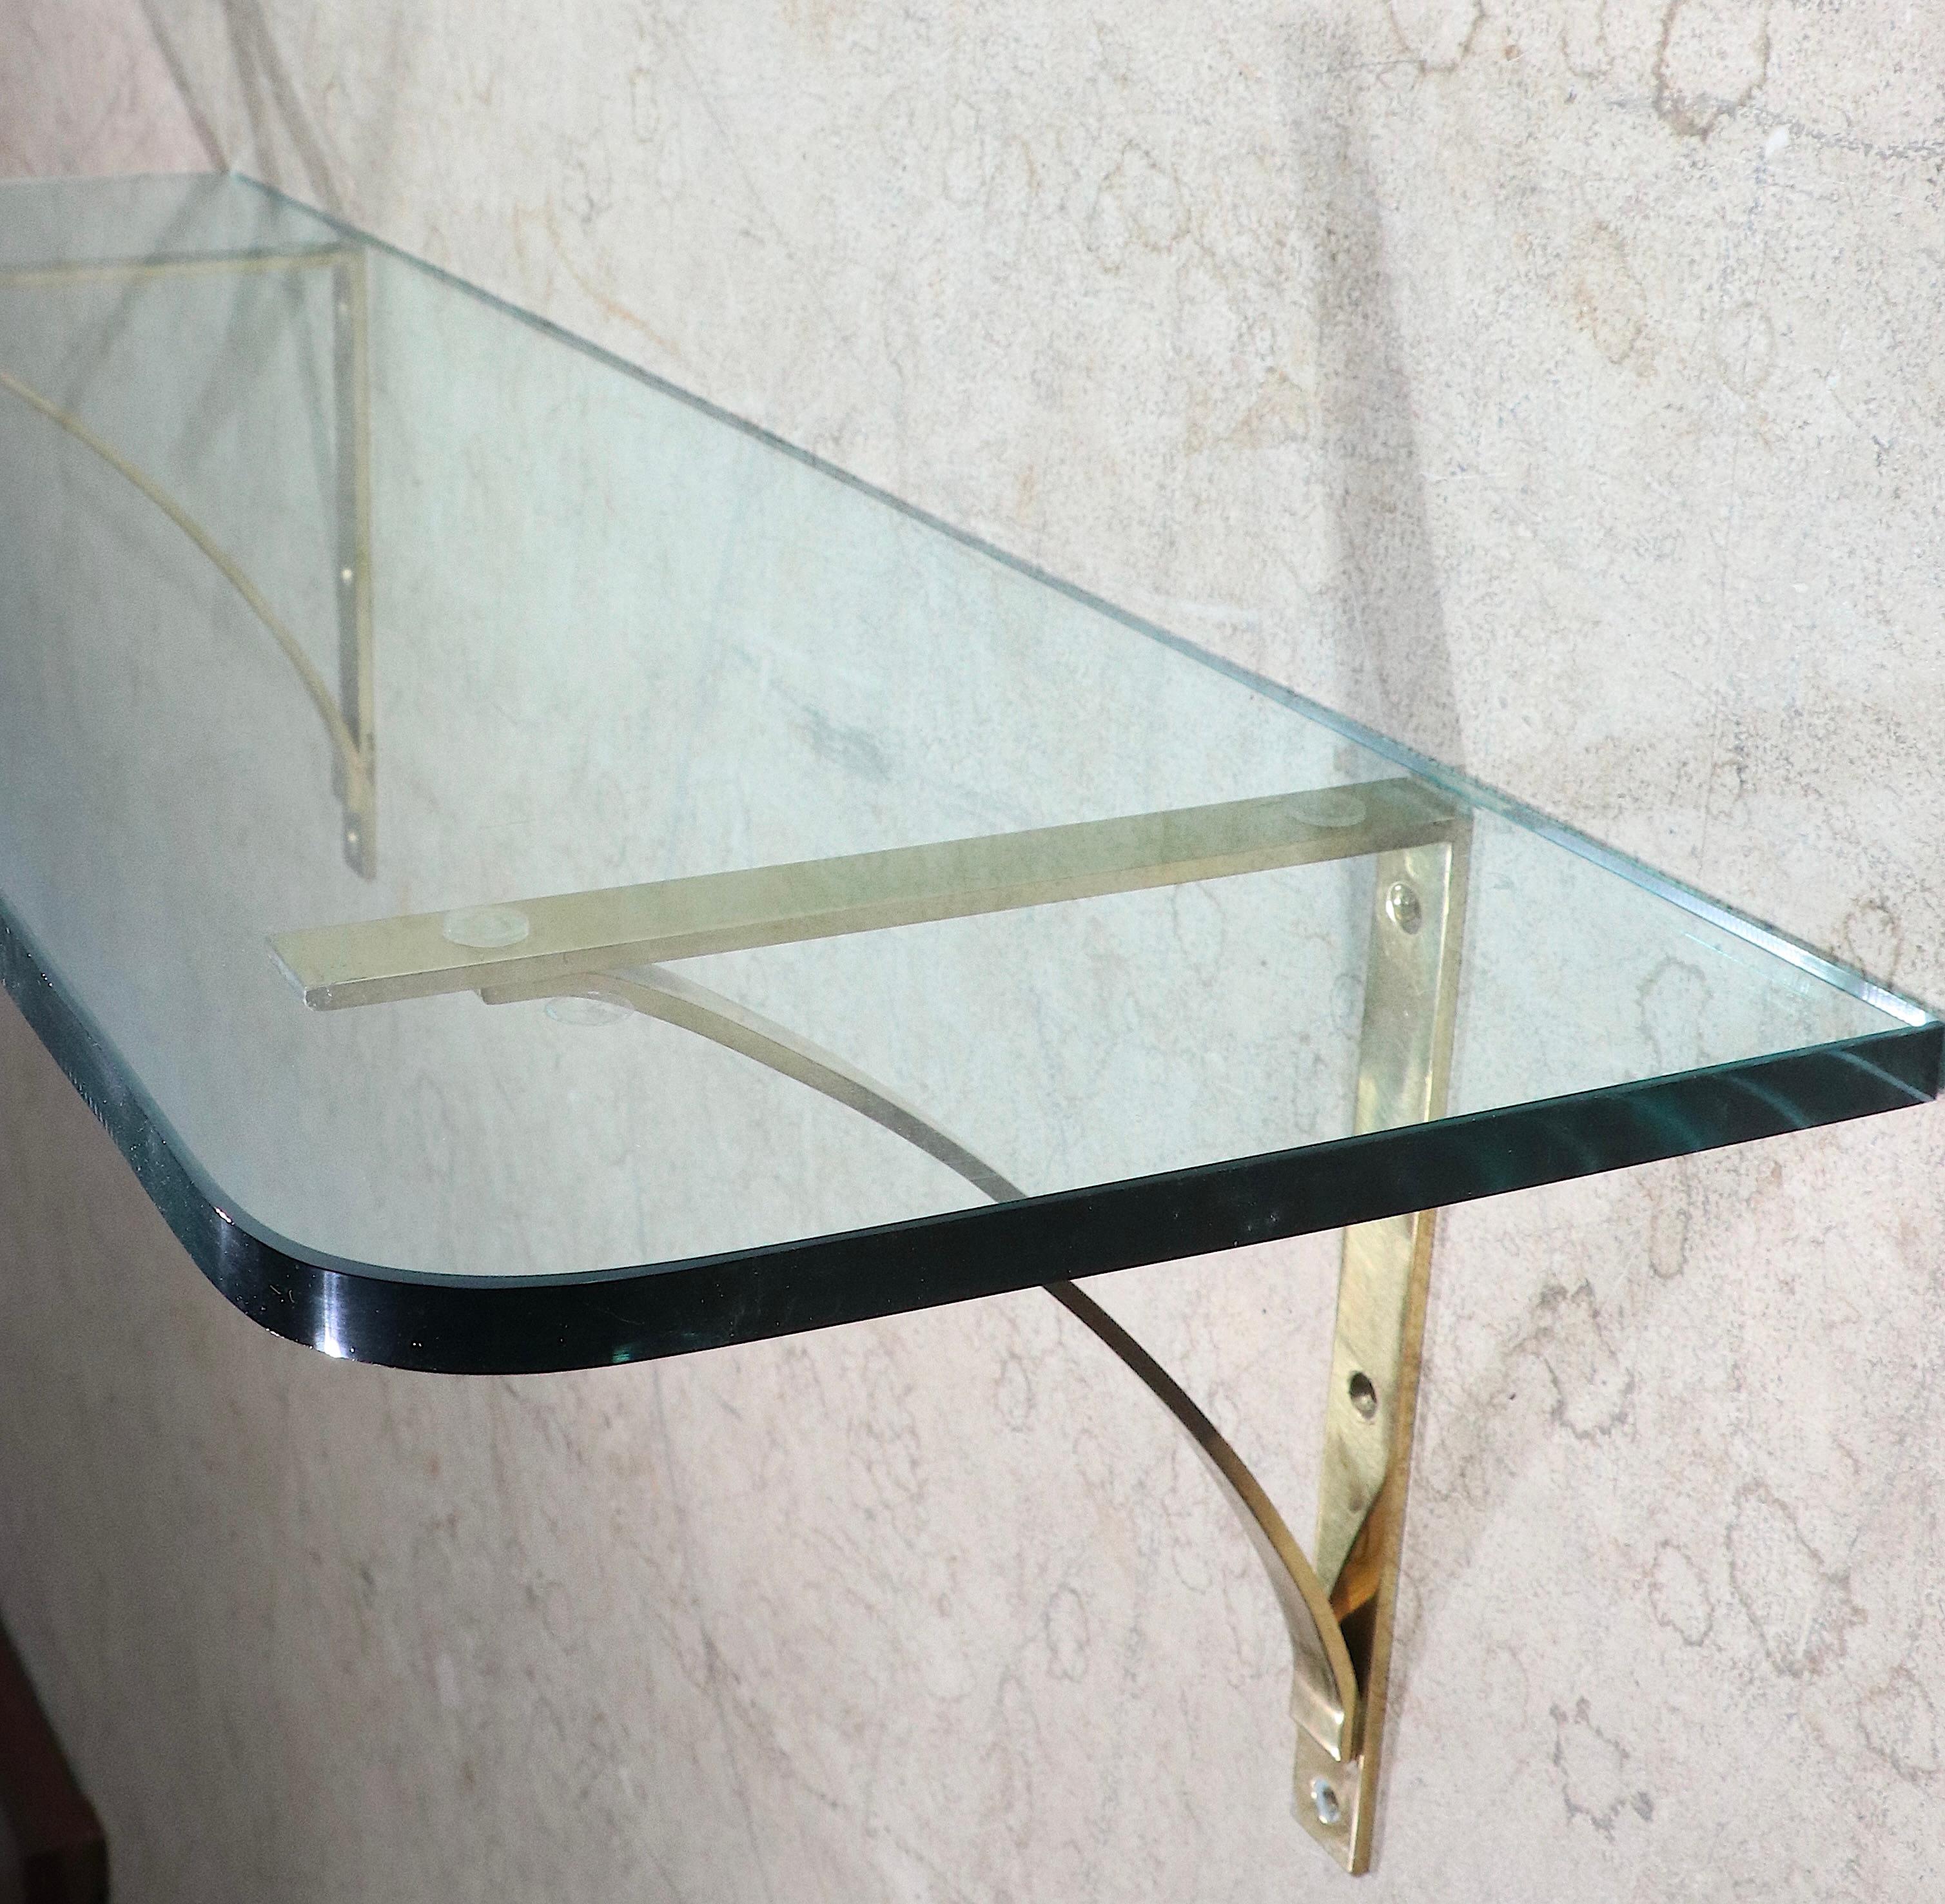 Post Modern Plate Glass and Brass Wall Mount Shelf, C. 1970's For Sale 7